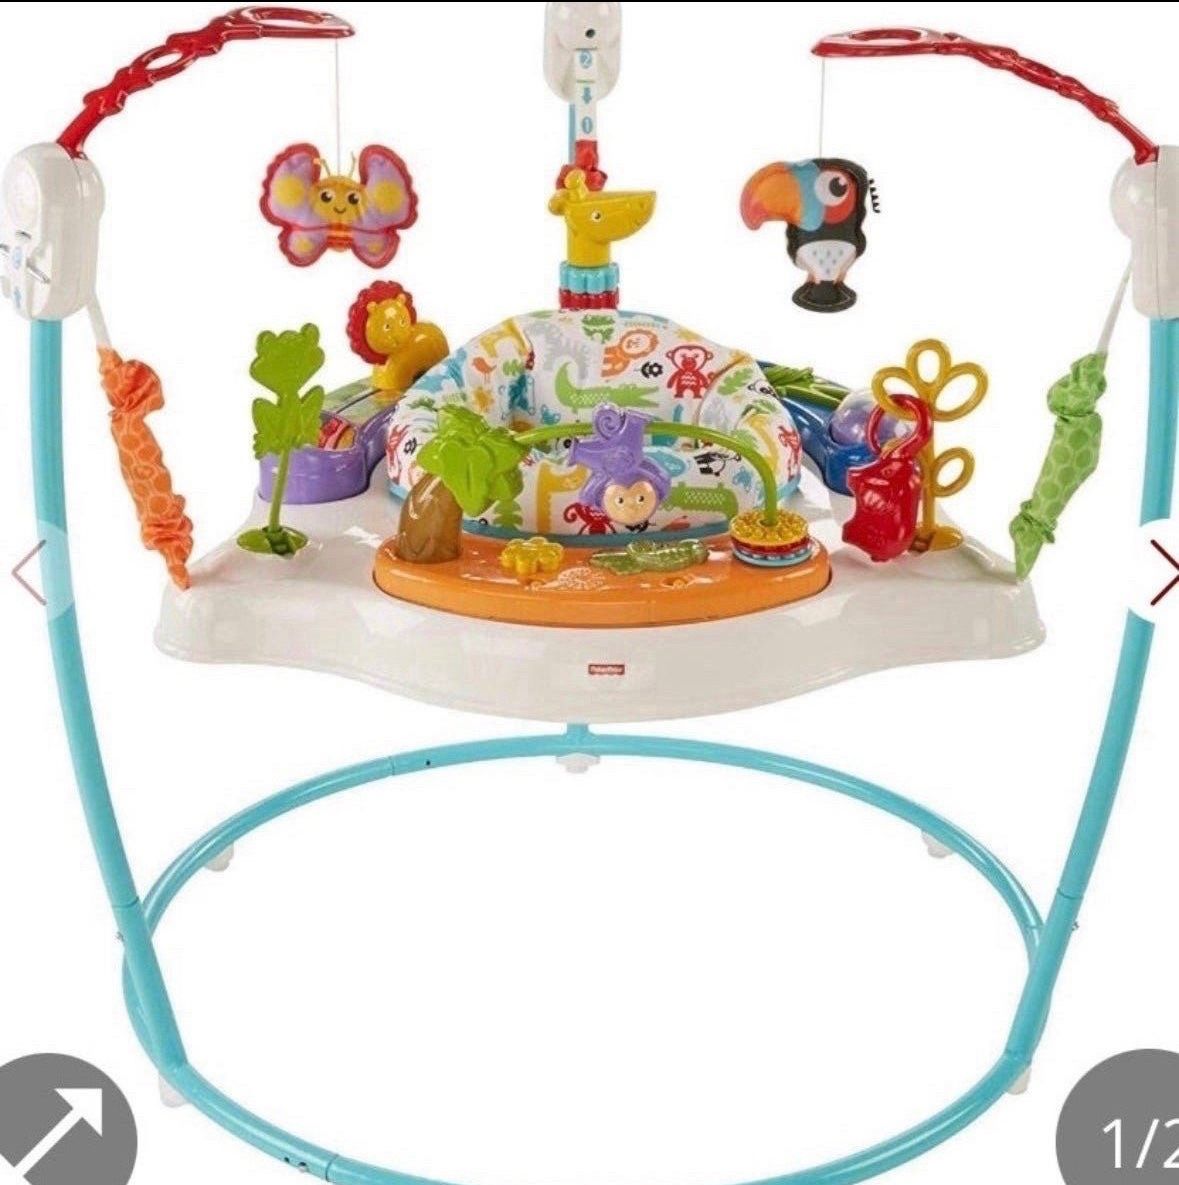 Fisher-Price Animal Activity Jumperoo, Blue  Open box Item  Box is damaged   INVENTORY NUMBER: 101(contact info removed)